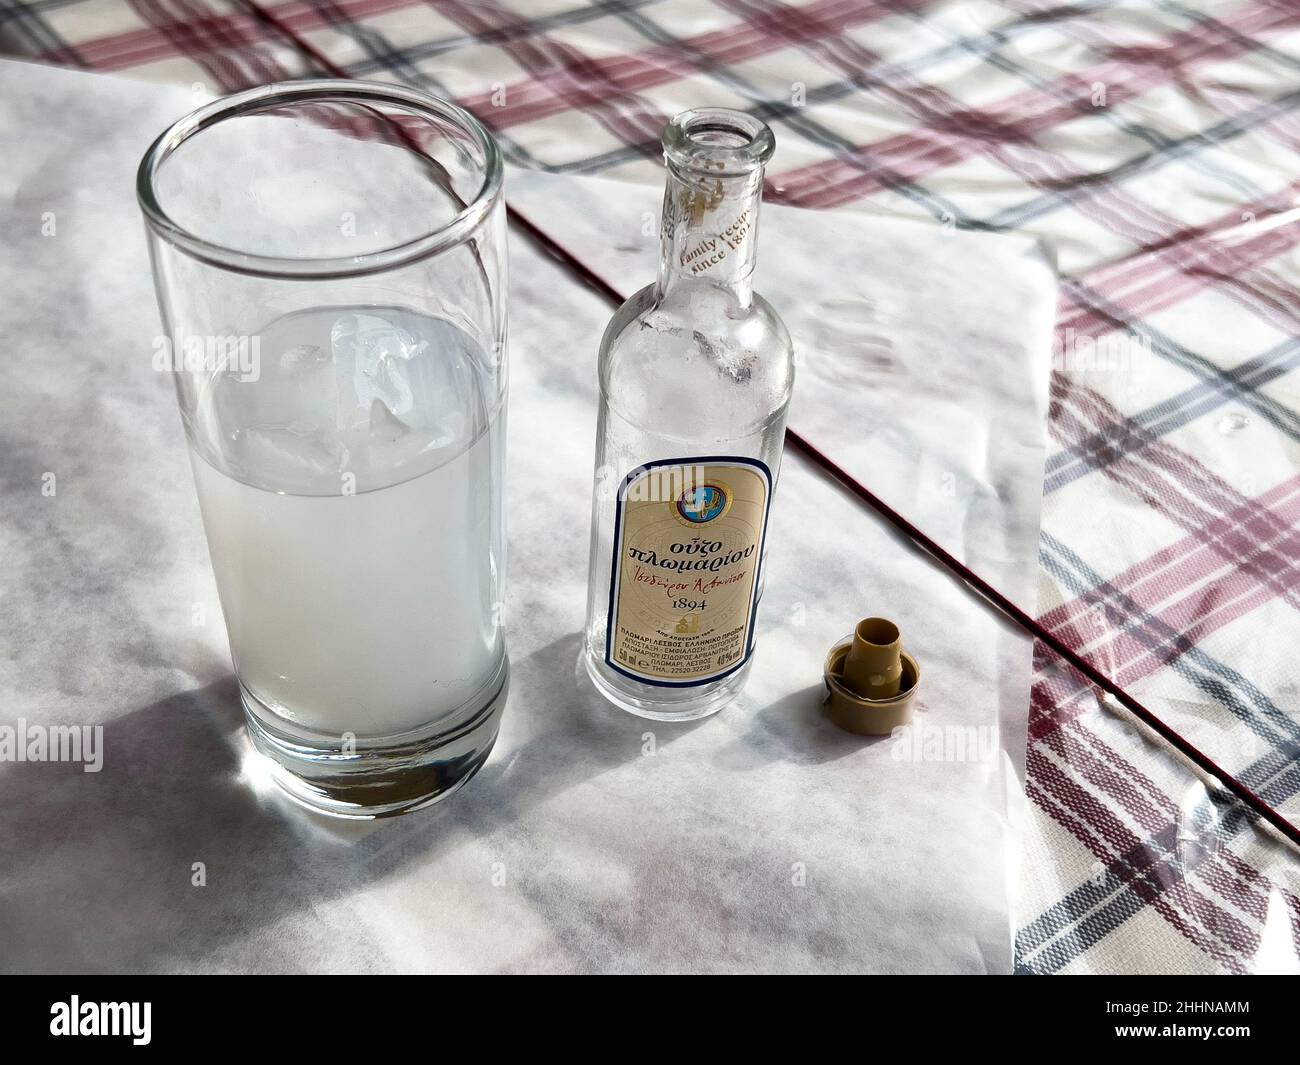 ATHENS, GREECE - JANUARY 16, 2022: Greek spirit Ouzo of Plomari branded bottle. Aperitif liquor drink with anise flavored milky liquid in glass. Stock Photo